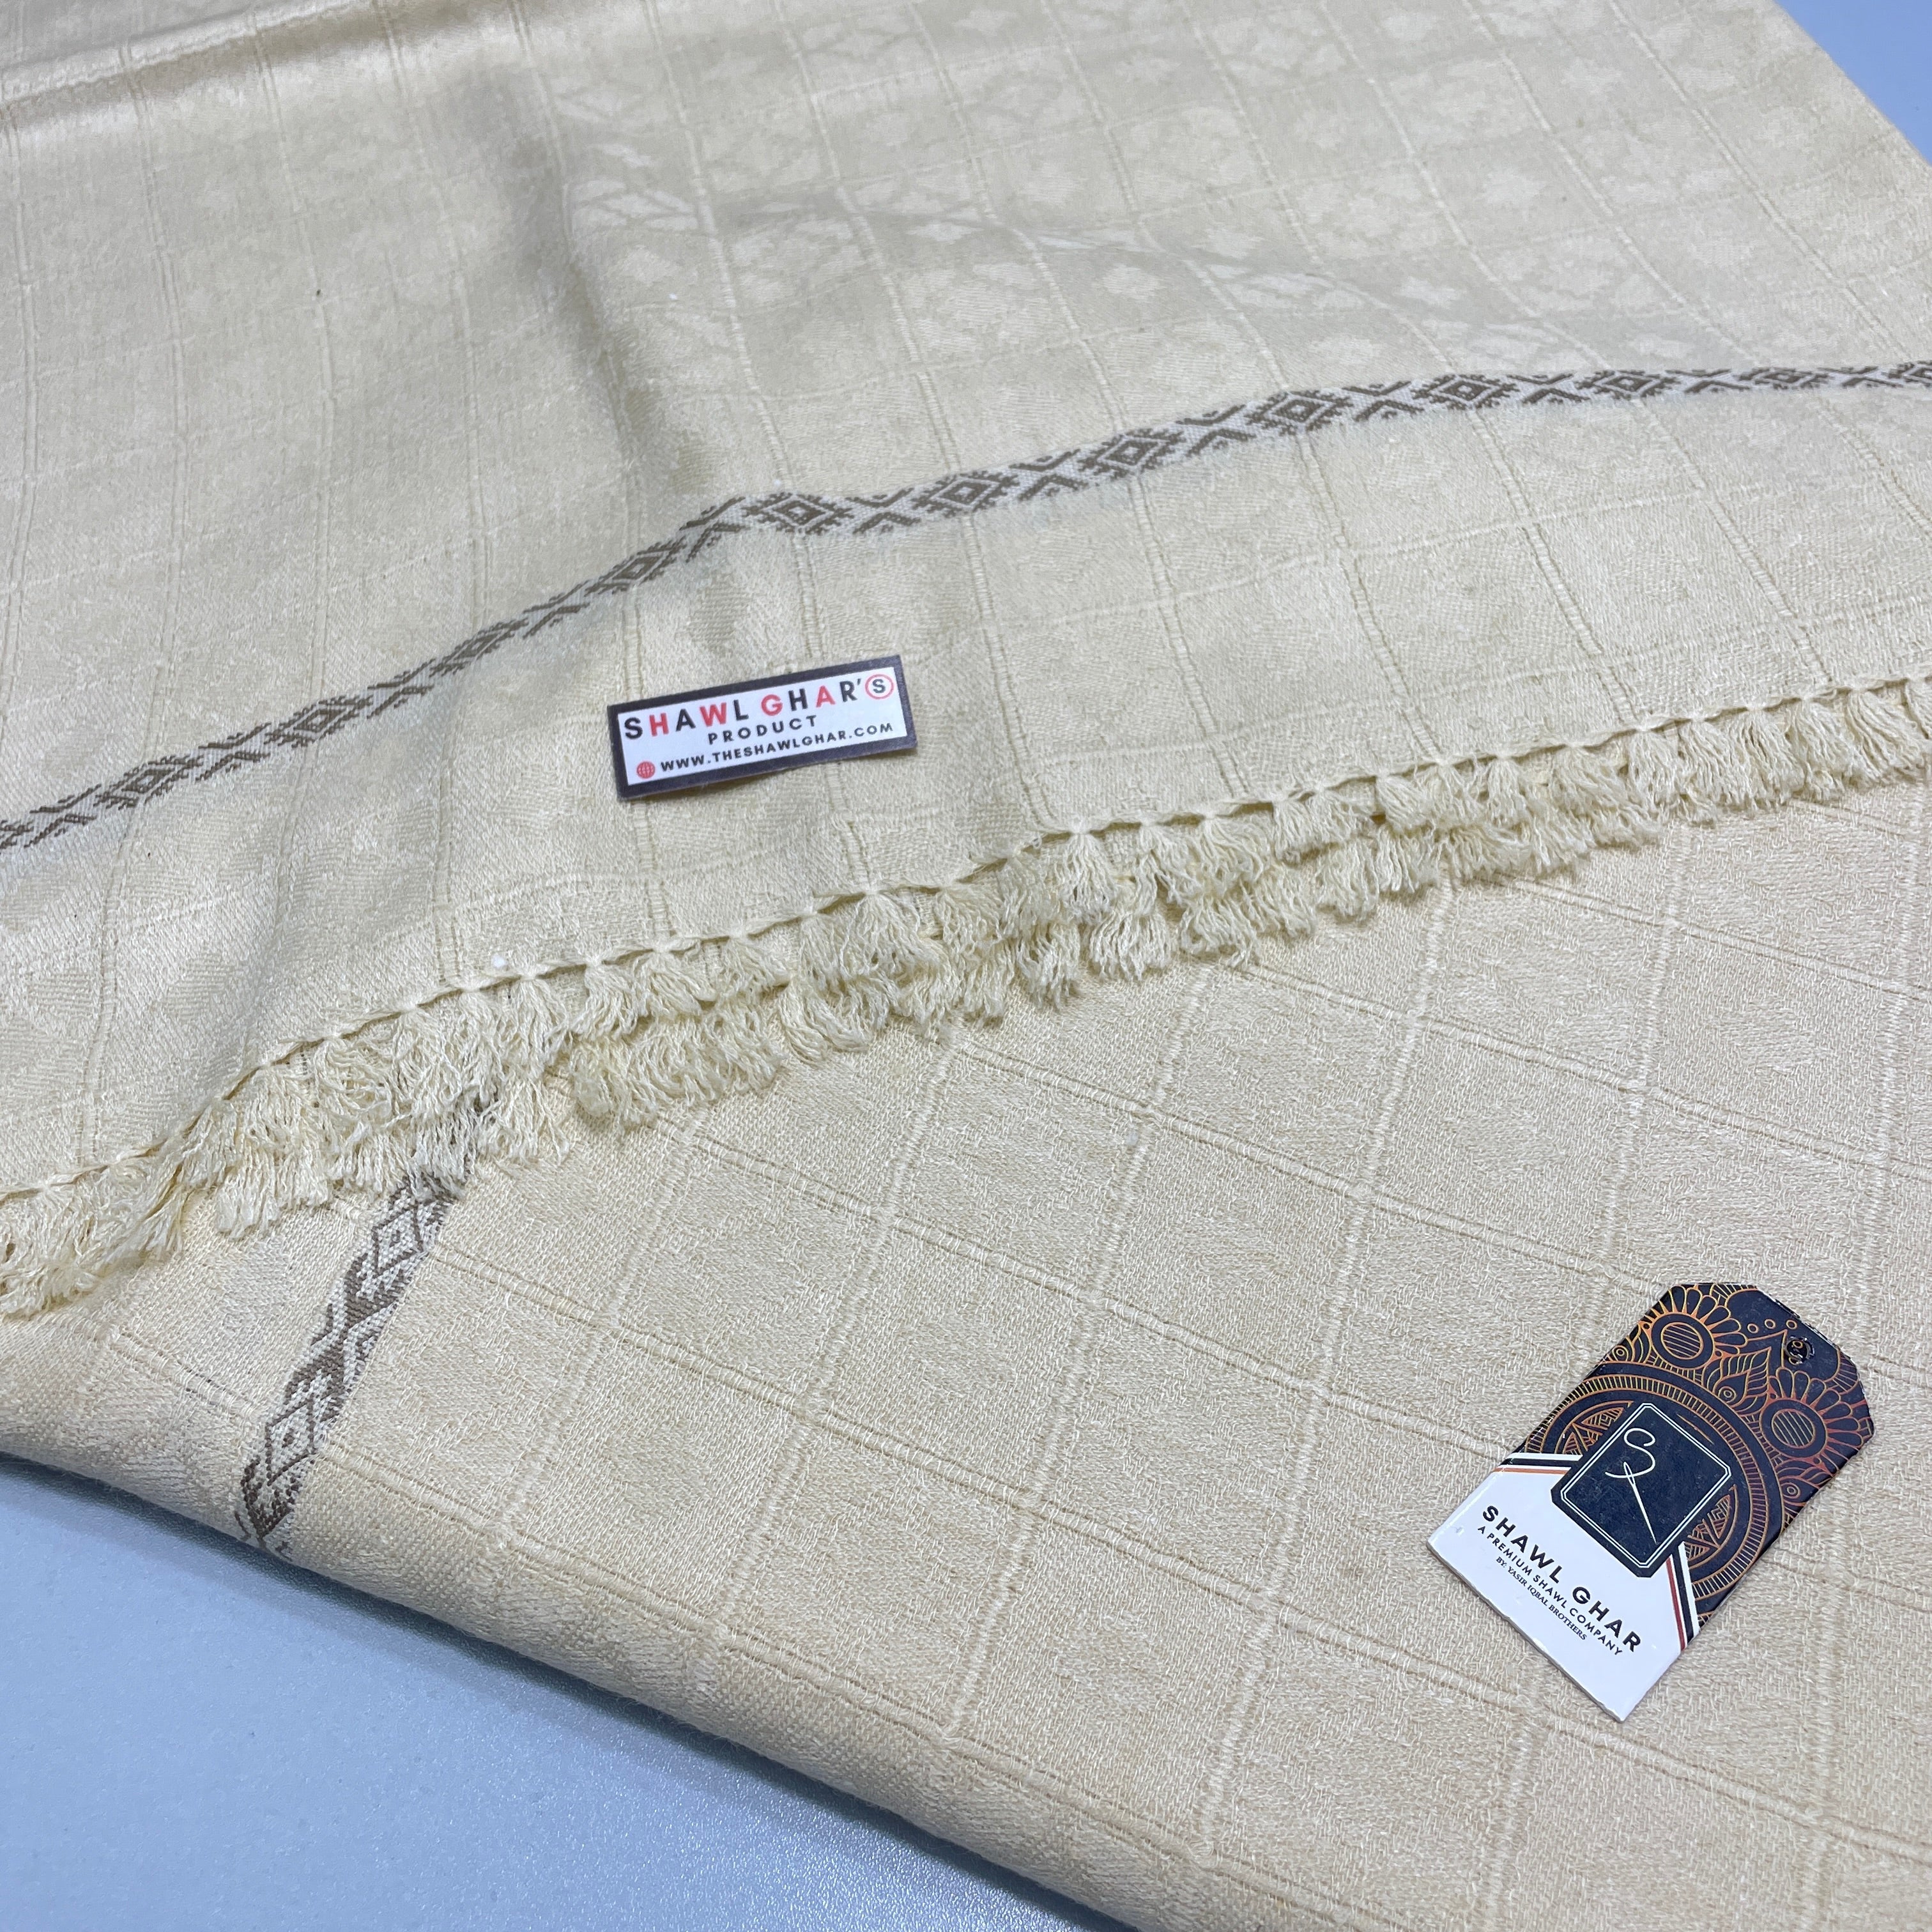 CheckMate Wool Shawl - L. Skin Color